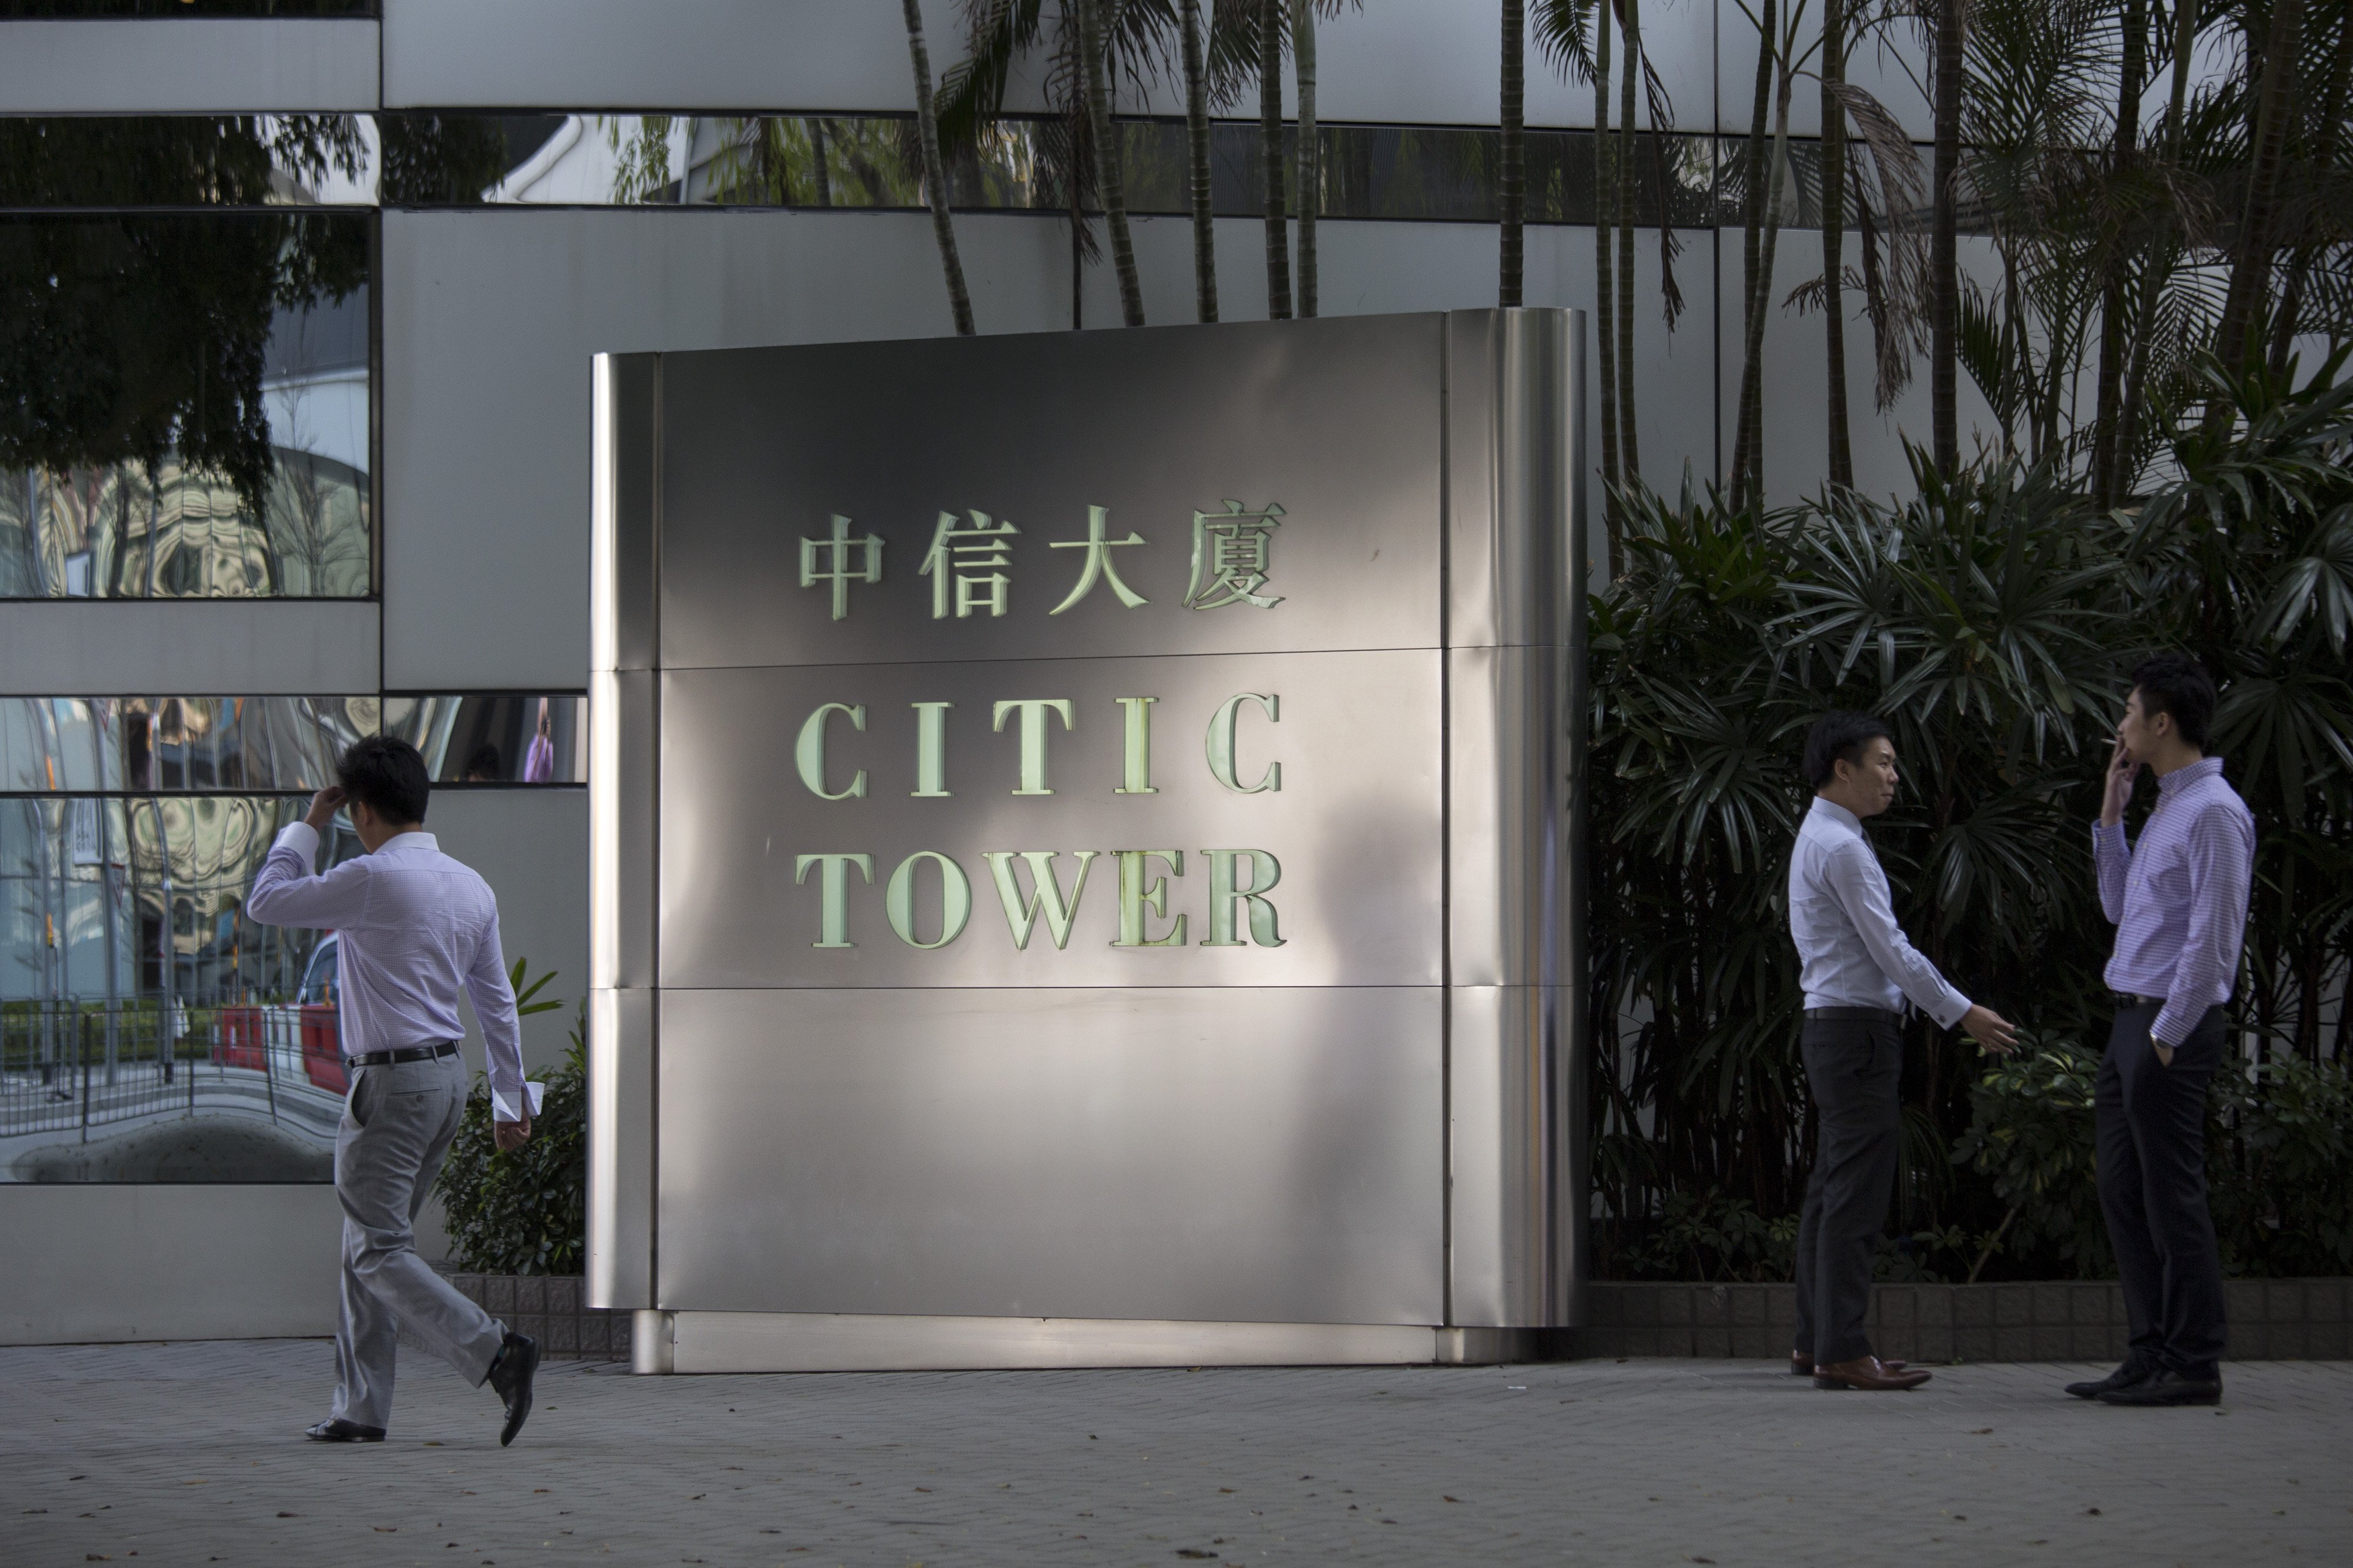 Men smoke in front of Citic Tower, which houses the corporate headquarters of Citic Pacific Ltd., in the Admiralty district of Hong Kong, China, on Thursday, March 27, 2014. Citic Group Corp., the state-owned company that describes itself as a pilot of China’s economic reform, plans to make billions of dollars of its assets part of a Hong Kong unit, Citic Pacific. Photographer: Jerome Favre/Bloomberg